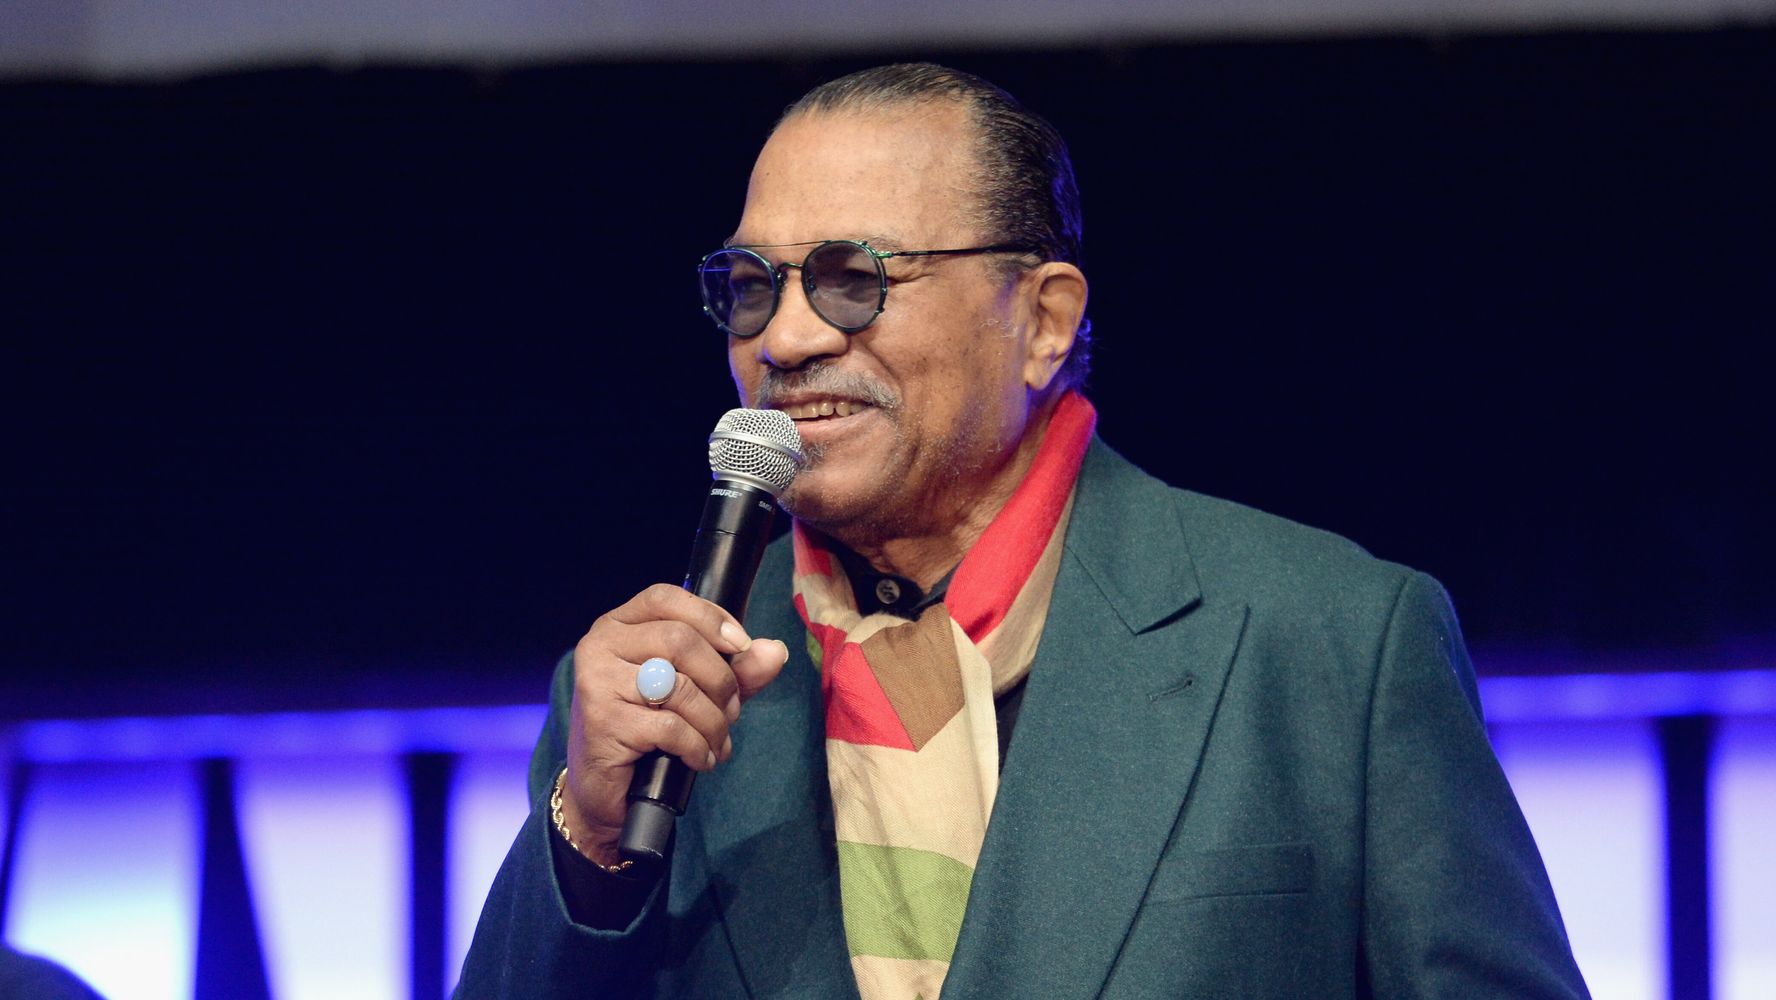 Star Wars' actor Billy Dee Williams opens up about gender fluidity